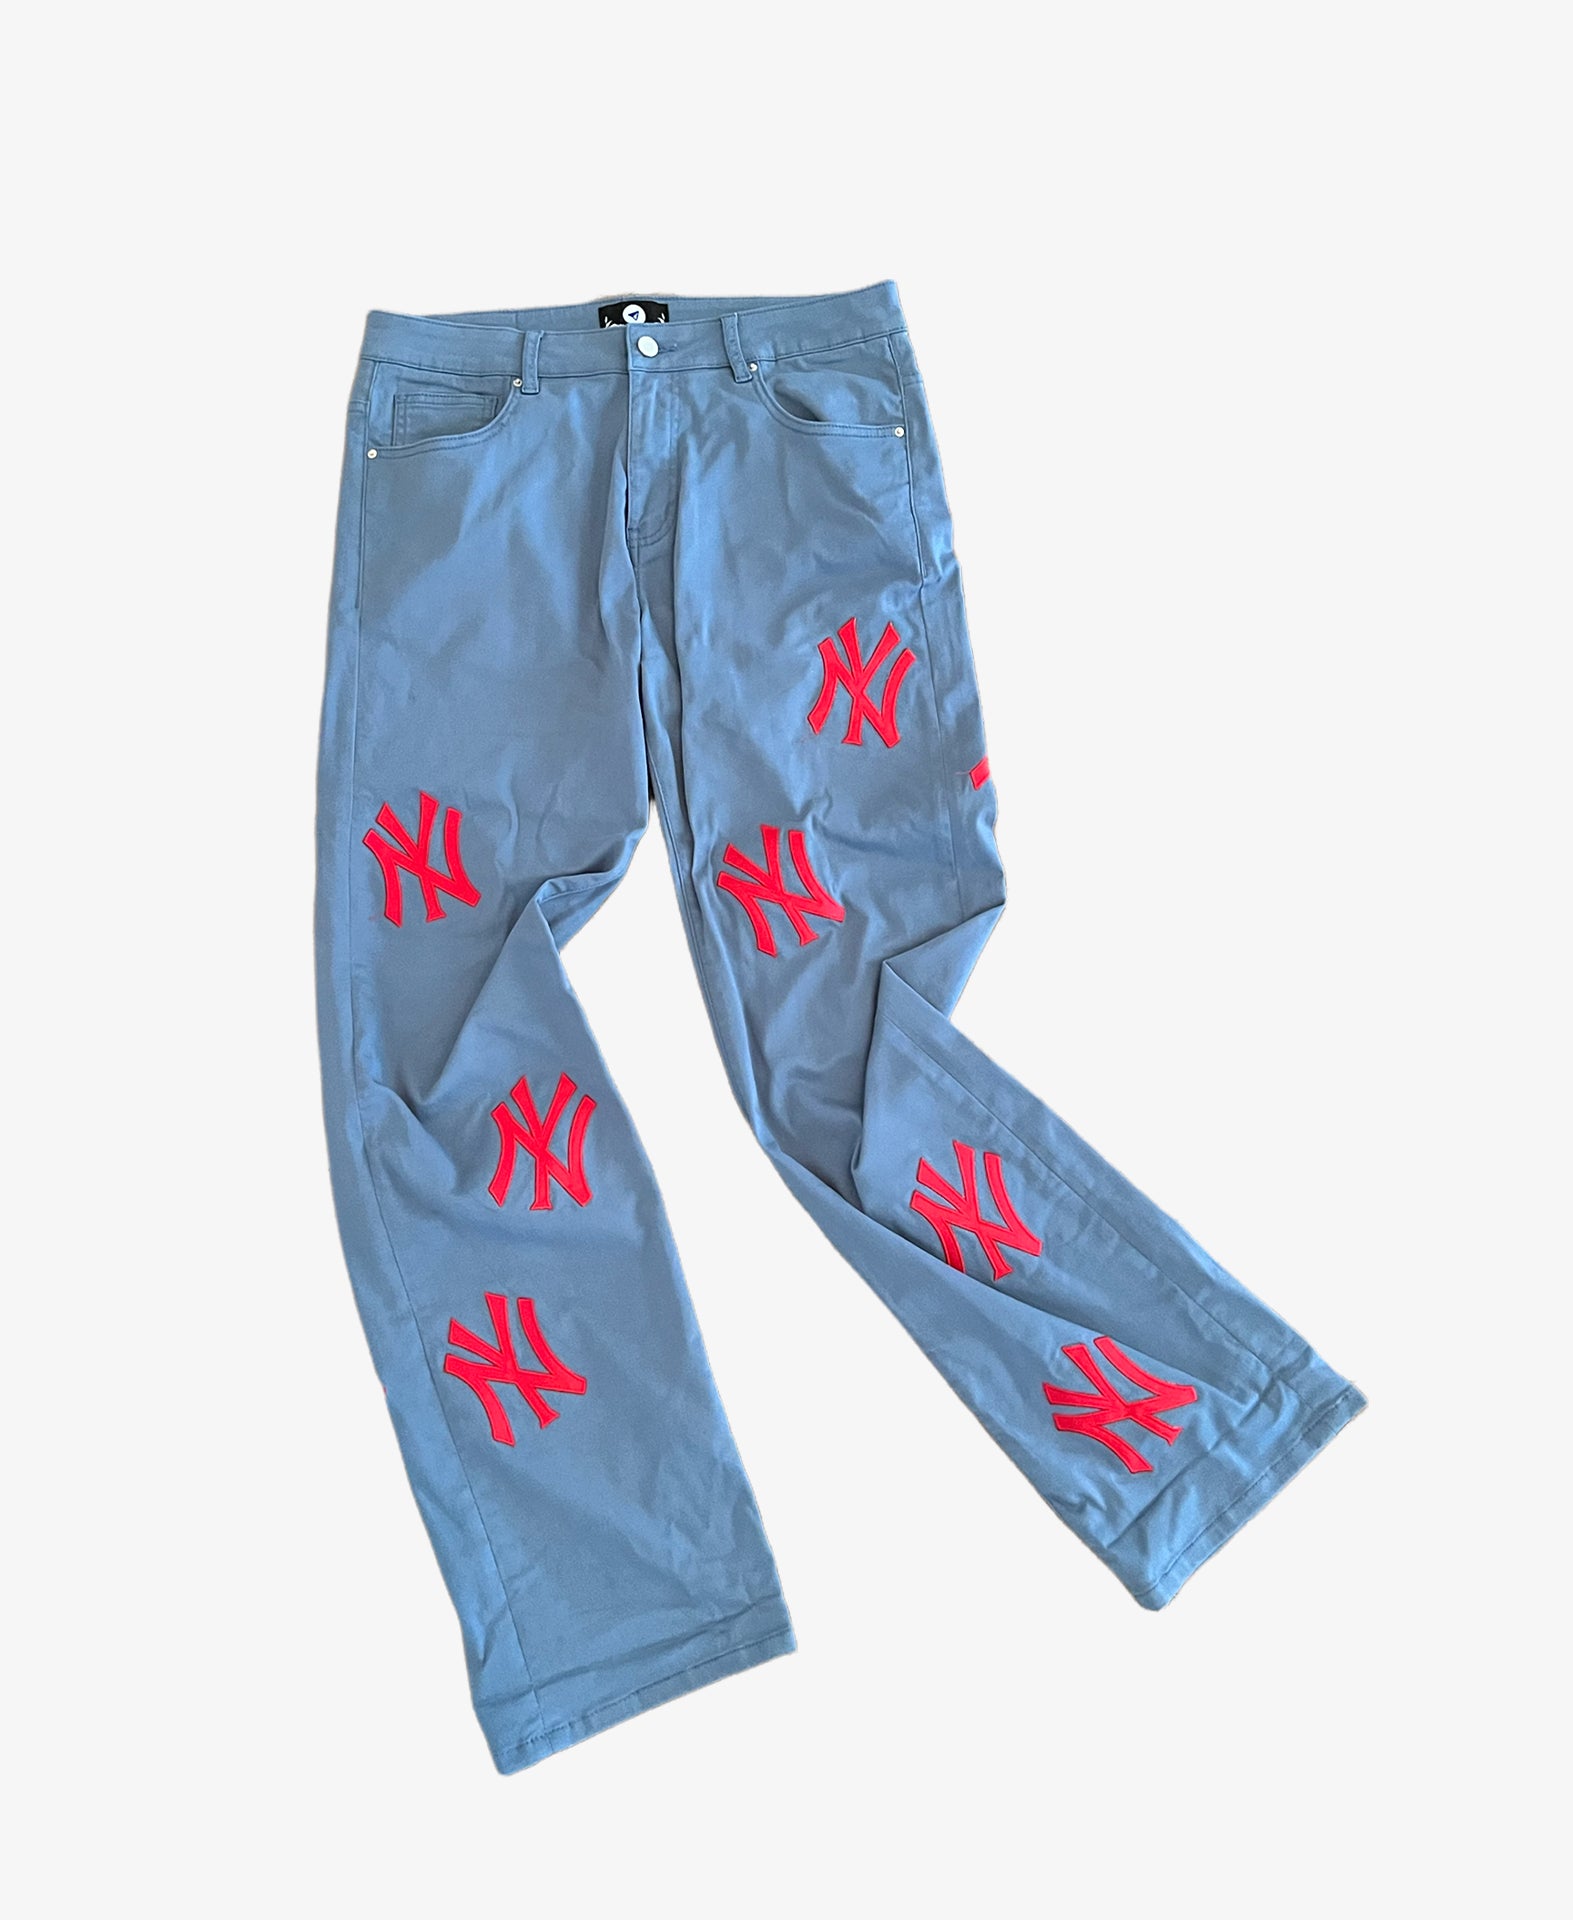 NY Patch Jeans - Baby Blue